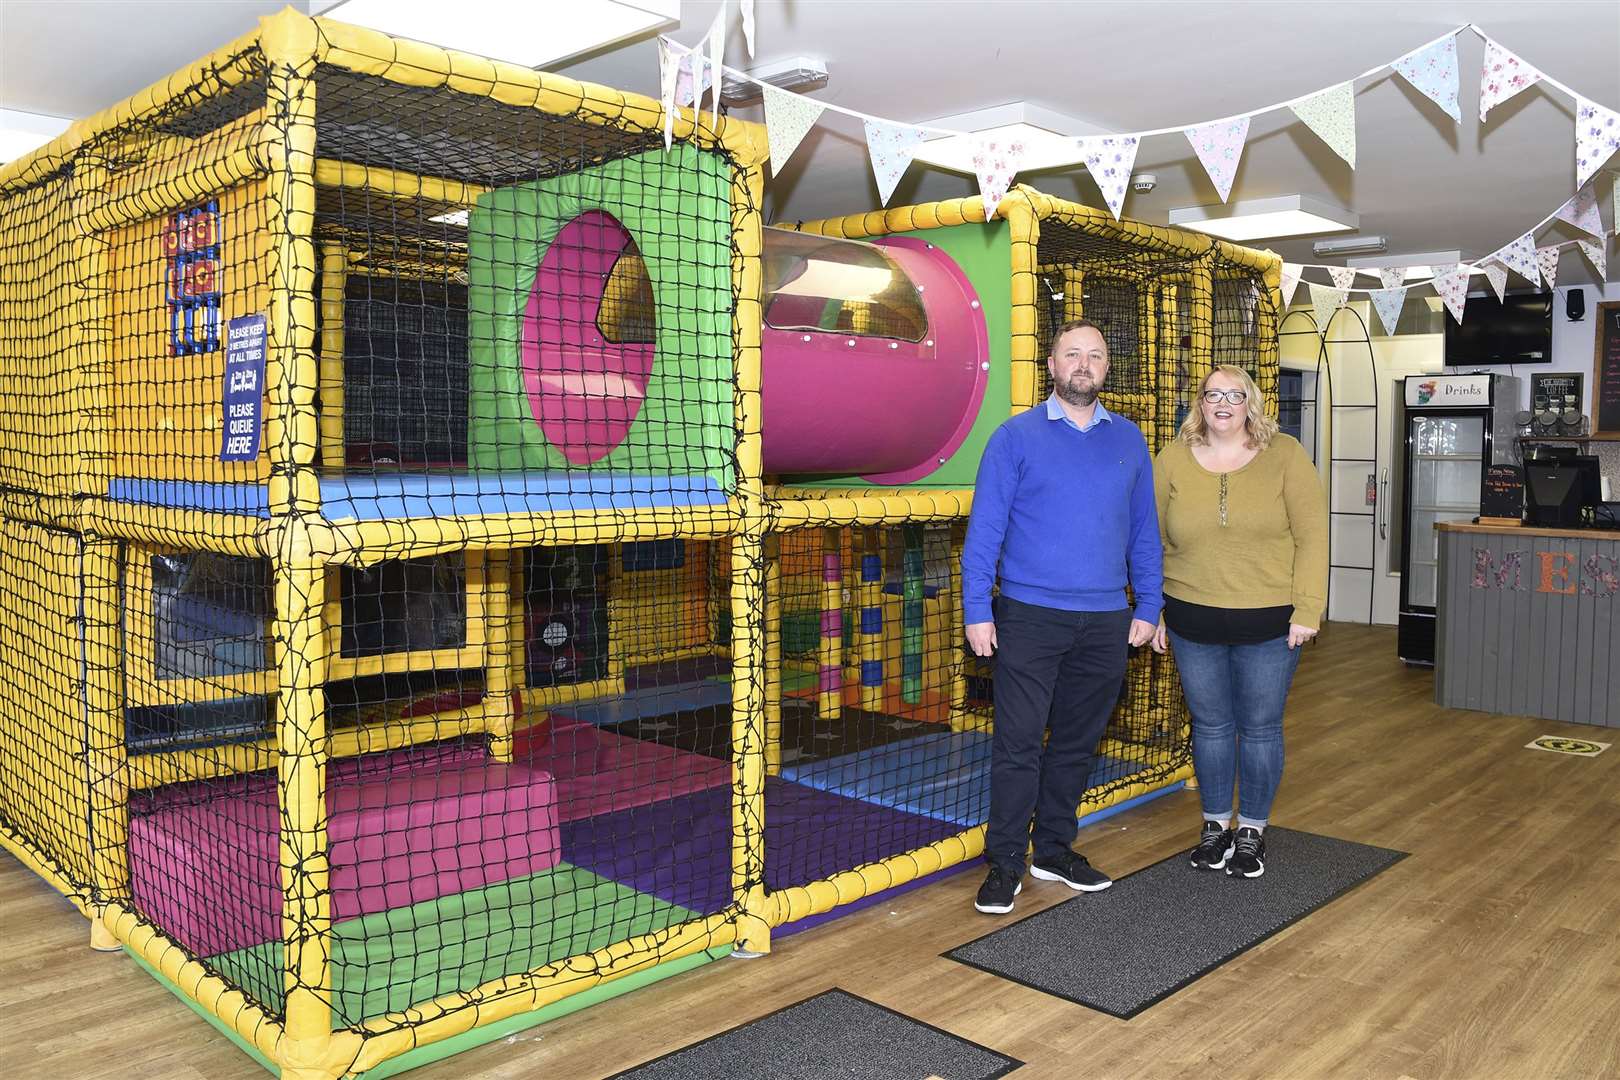 Ian and Fiona Carlisle beside the climbing frame at Messy Nessy. They that argue there is no scientific reason to keep soft play closed. Picture: Mel Roger